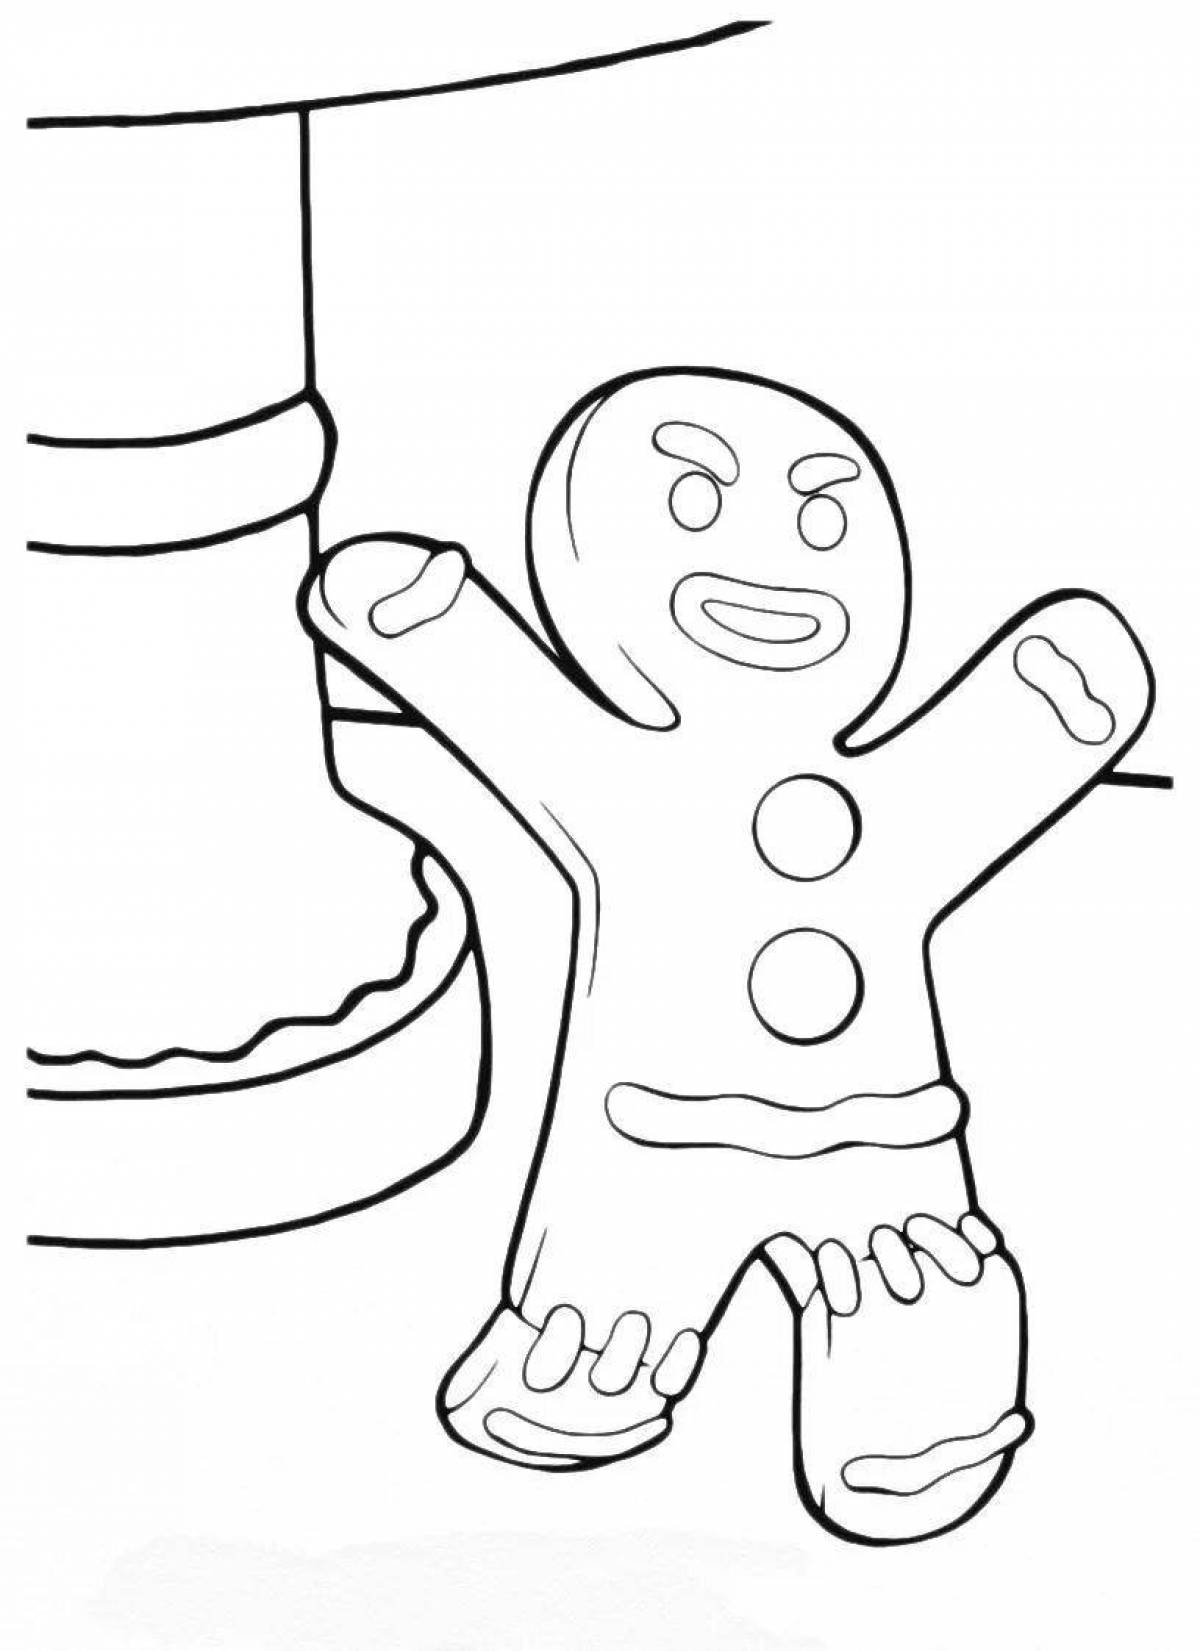 Outstanding shrek cookie coloring page